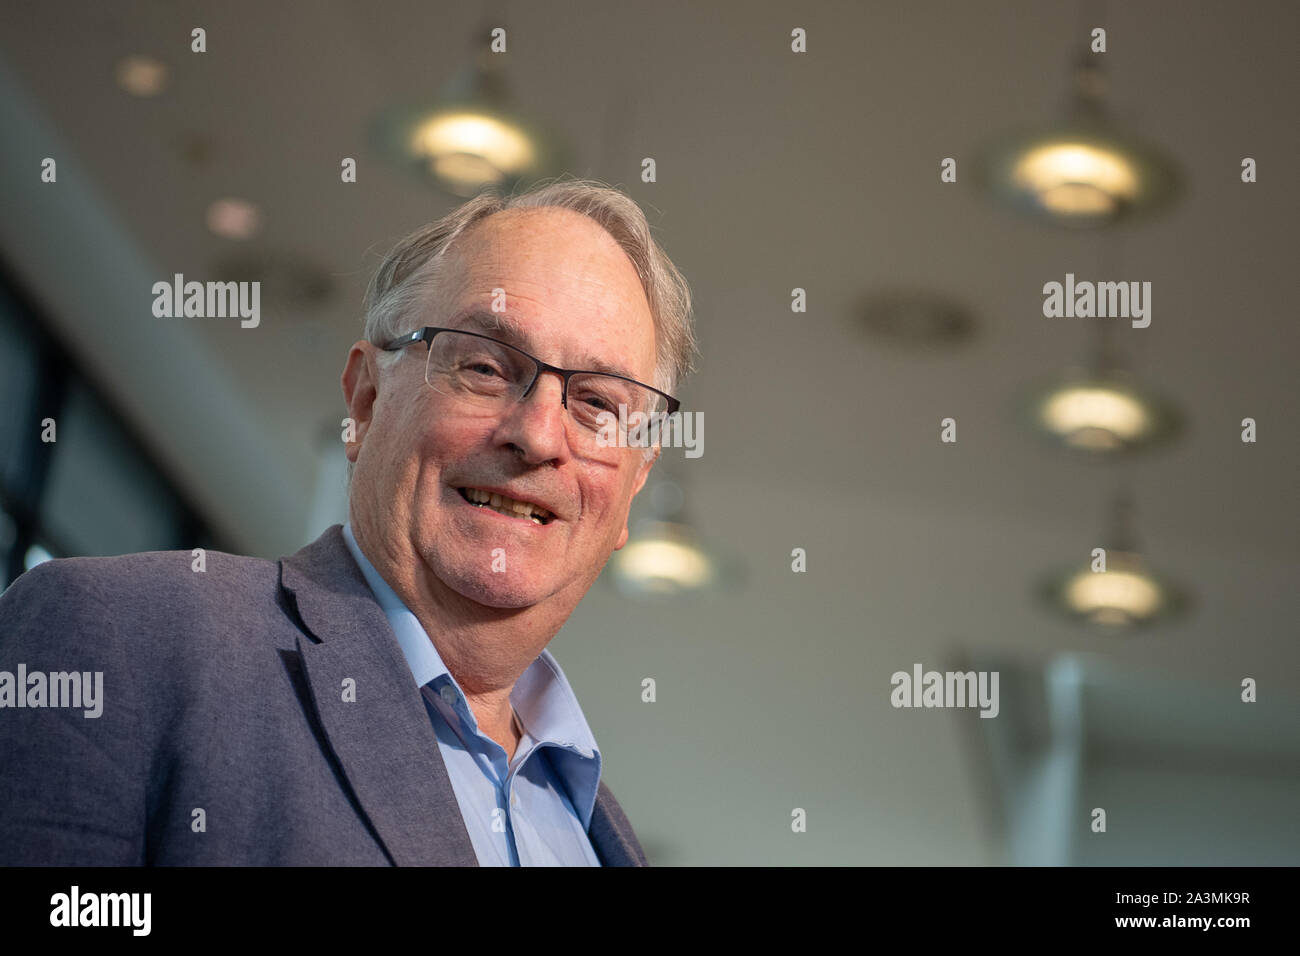 Ulm, Germany. 09th Oct, 2019. Chemist Stanley Whittingham attends an international battery congress and is delighted to receive the Nobel Prize. Whittingham was awarded the Nobel Prize in Chemistry 2019. This year's Nobel Prize in Chemistry goes to the Jena-born American Goodenough, Stanley Whittingham (born in Great Britain) and the Japanese Yoshino for the development of lithium-ion batteries. This was announced by the Royal Swedish Academy of Sciences on 09.10.2019 in Stockholm. Credit: dpa picture alliance/Alamy Live News Stock Photo